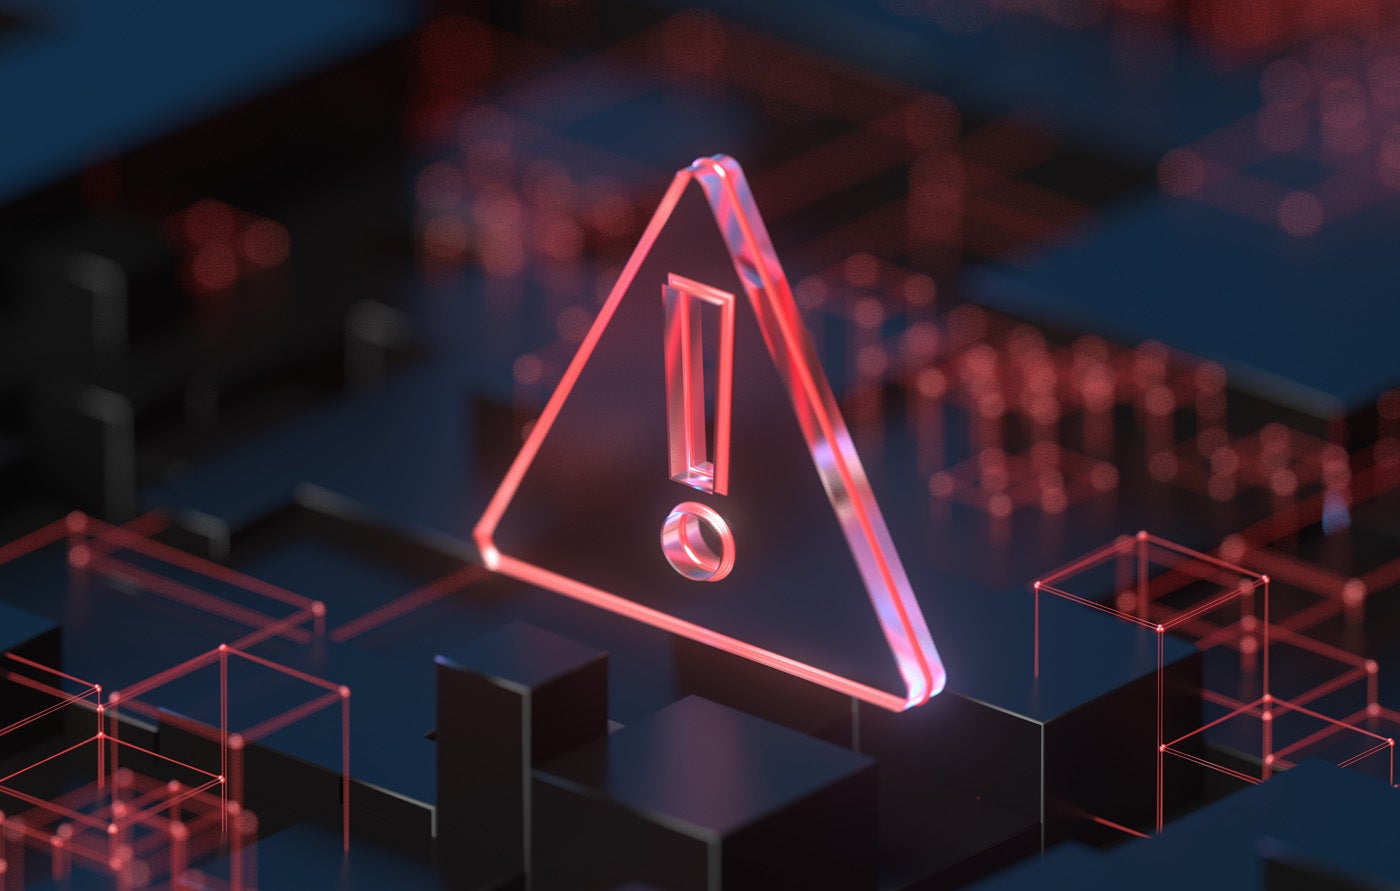 A 3D rendering of a red warning sign hovering in a sea of black cubes.